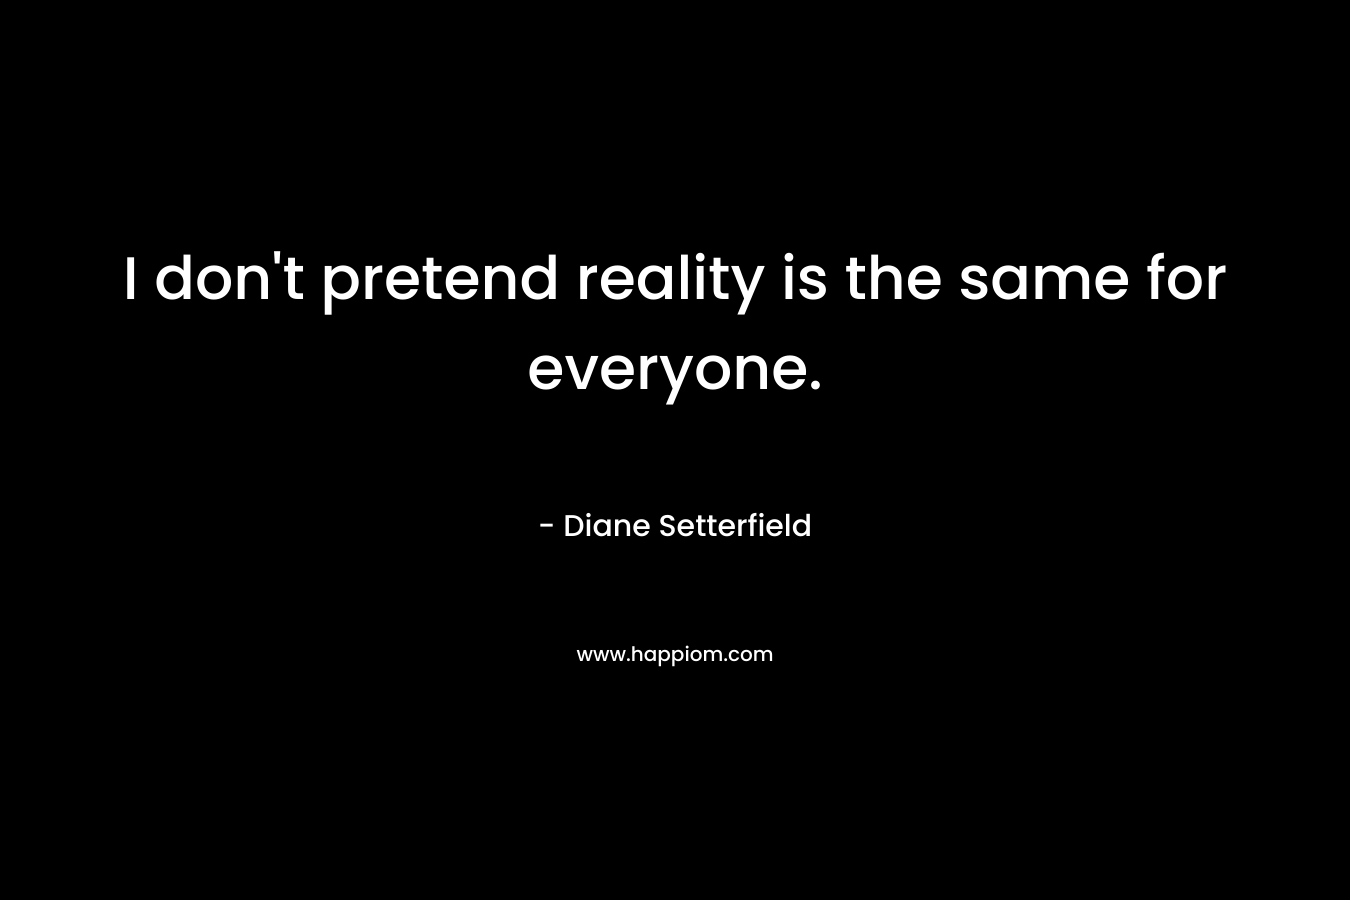 I don’t pretend reality is the same for everyone. – Diane Setterfield